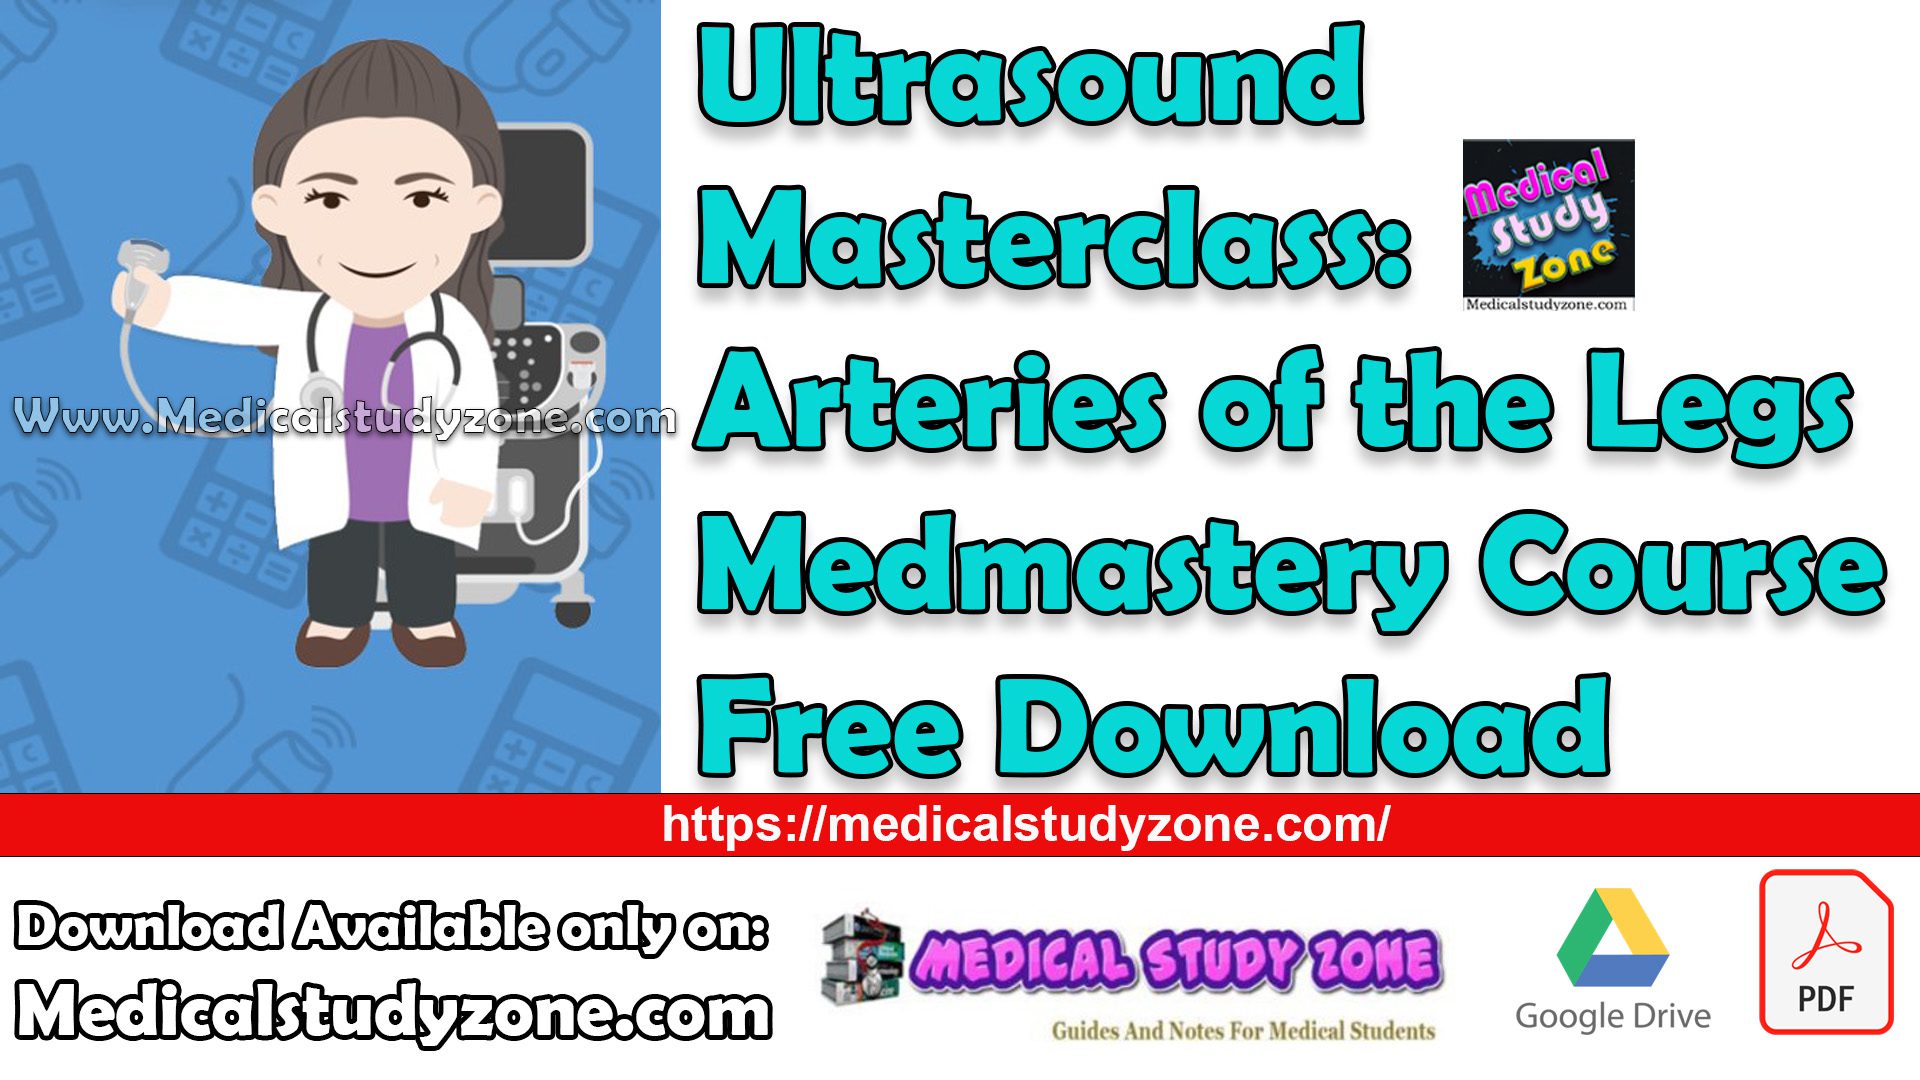 Ultrasound Masterclass: Arteries of the Legs Medmastery Course Free Download